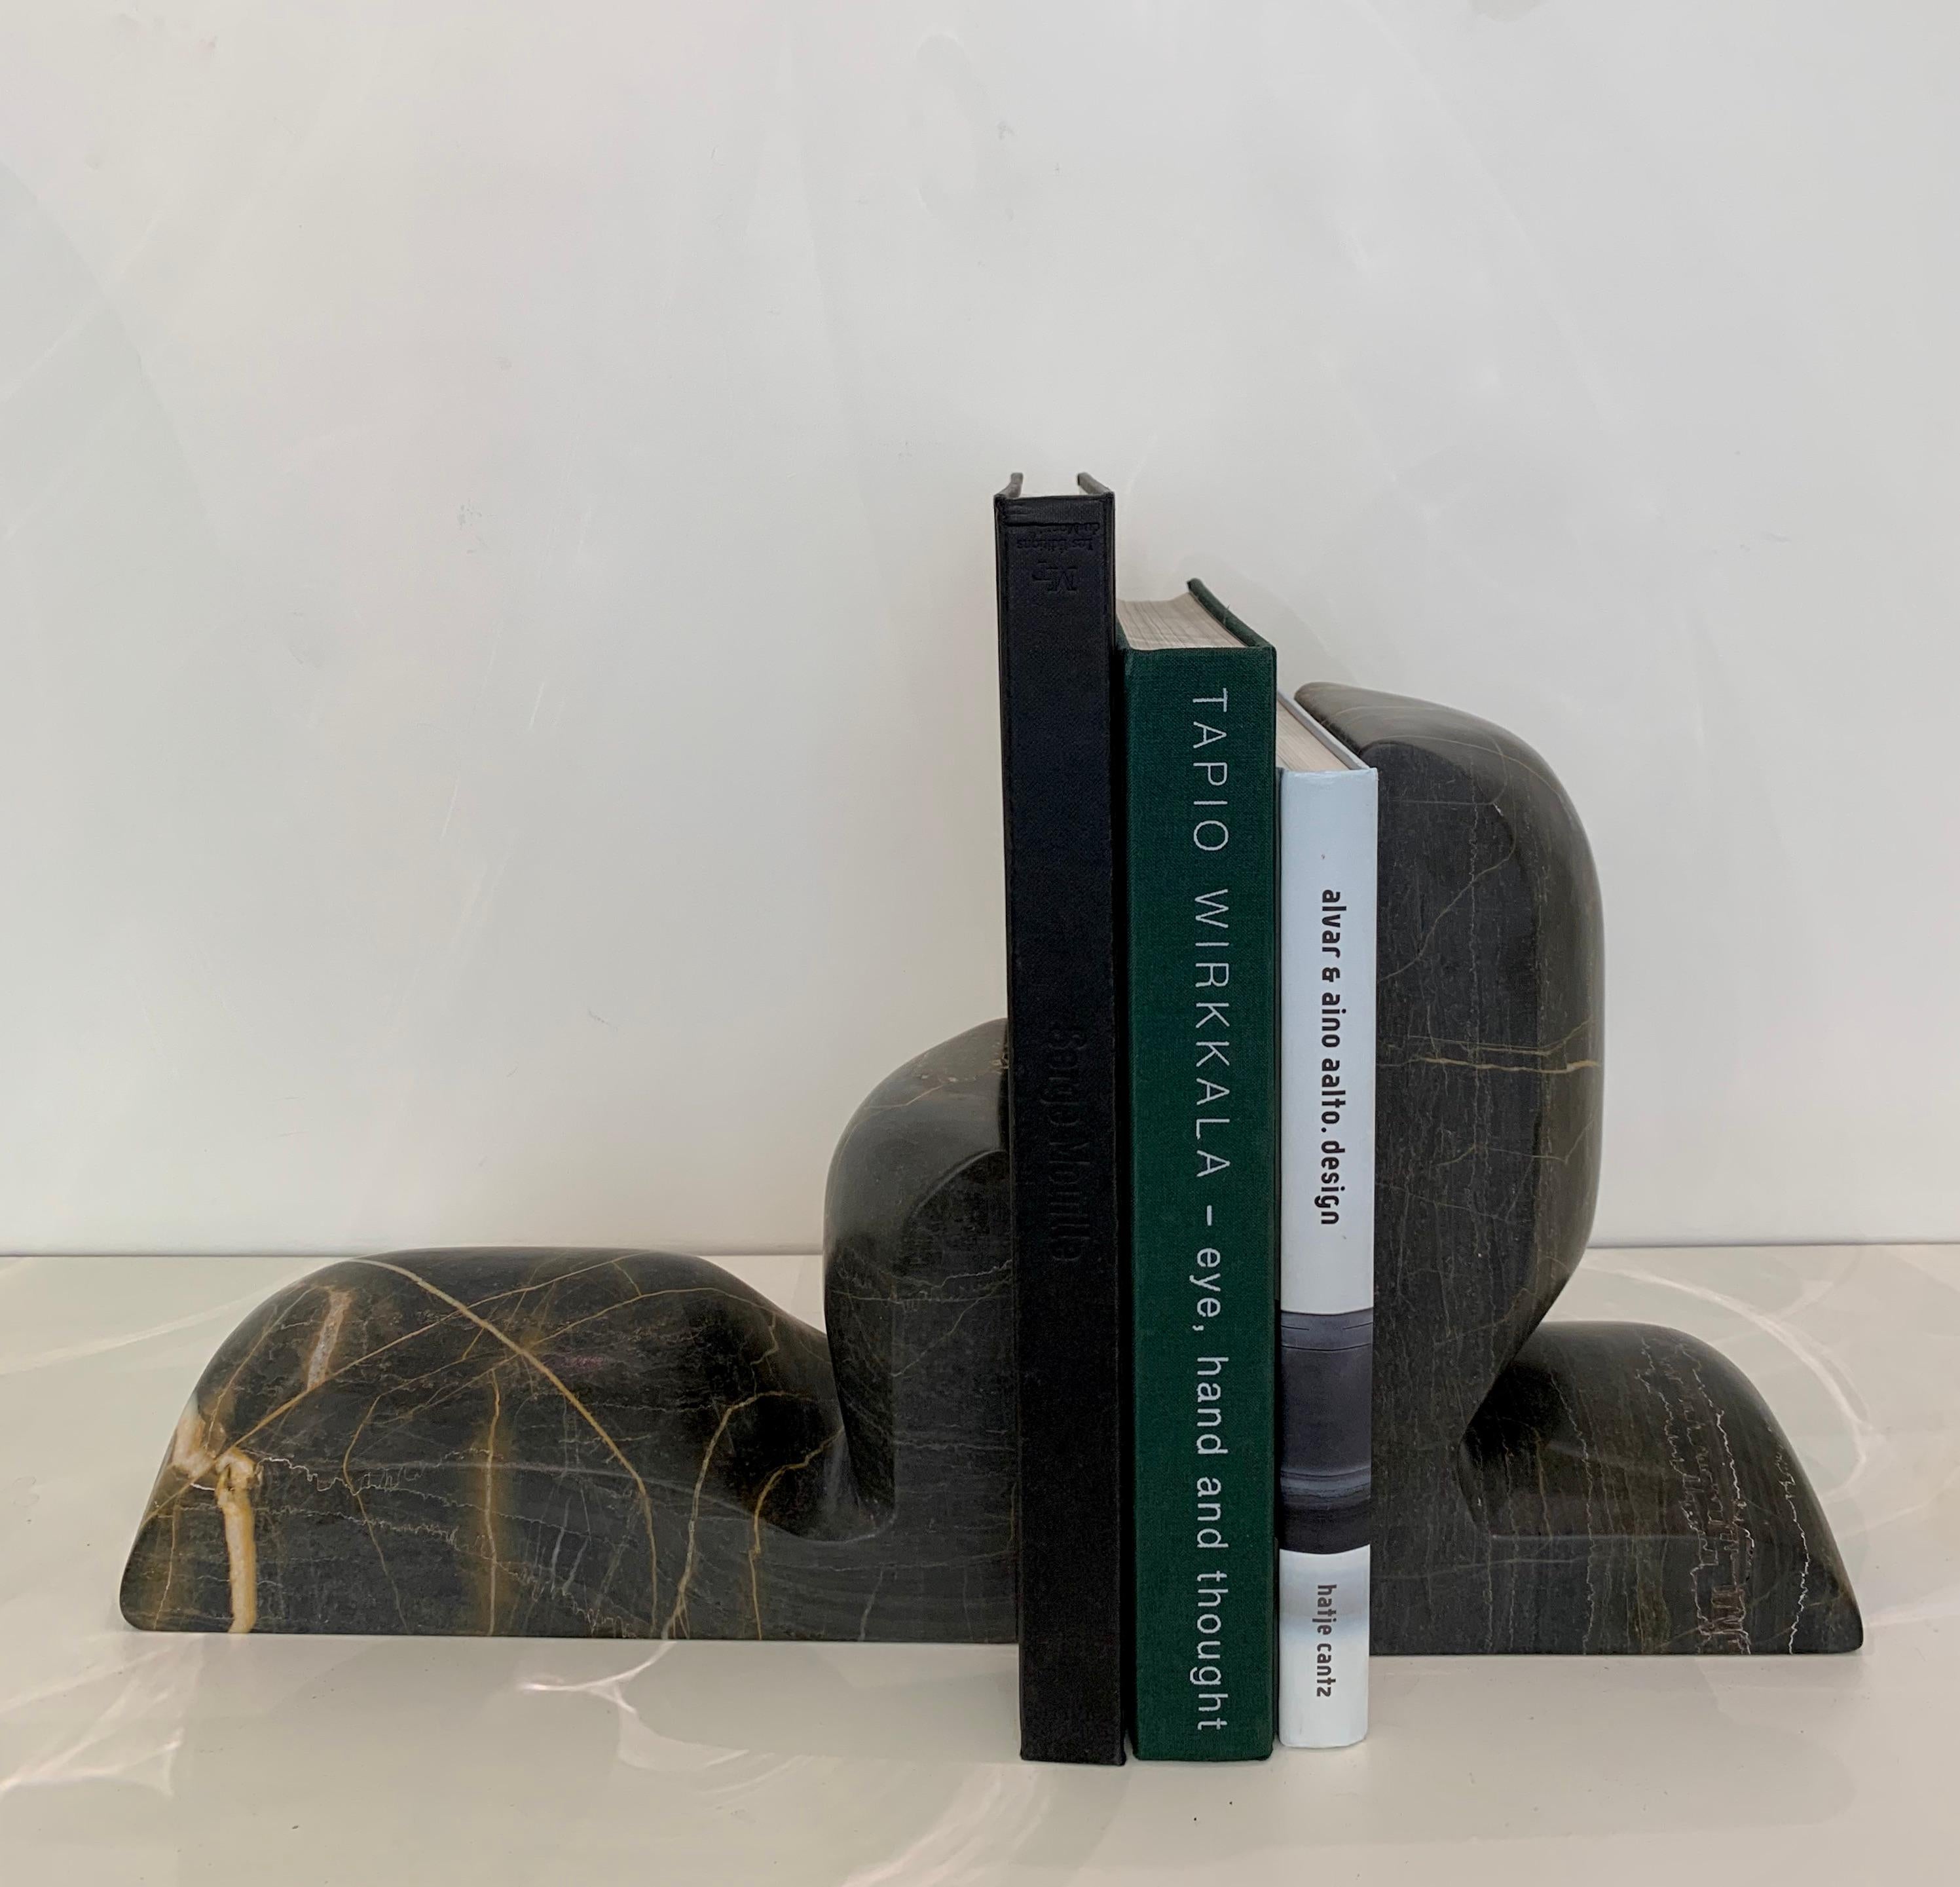 Pair of 'SLO' book ends in 'Grey Sain Laurent' marble by French designer Christophe Delcourt. 
Renown designer and interior decorator Delcourt celebrates his passion for noble materials, by infusing the pristine marble with the appearance of a soft